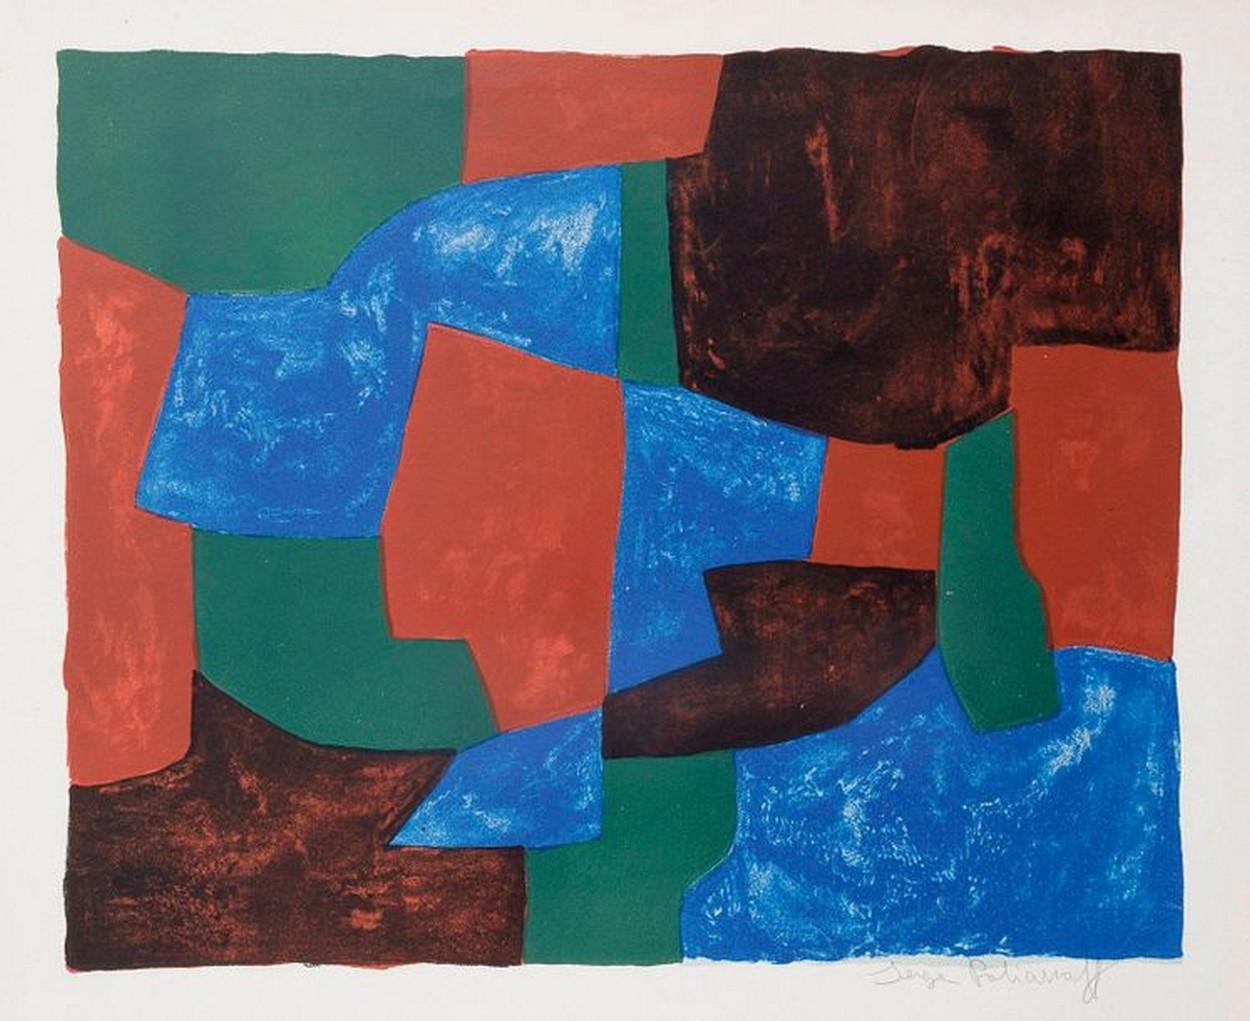 Serge Poliakoff Abstract Print - "COMPOSITION BLEUE, VERTE ET ROUGE".